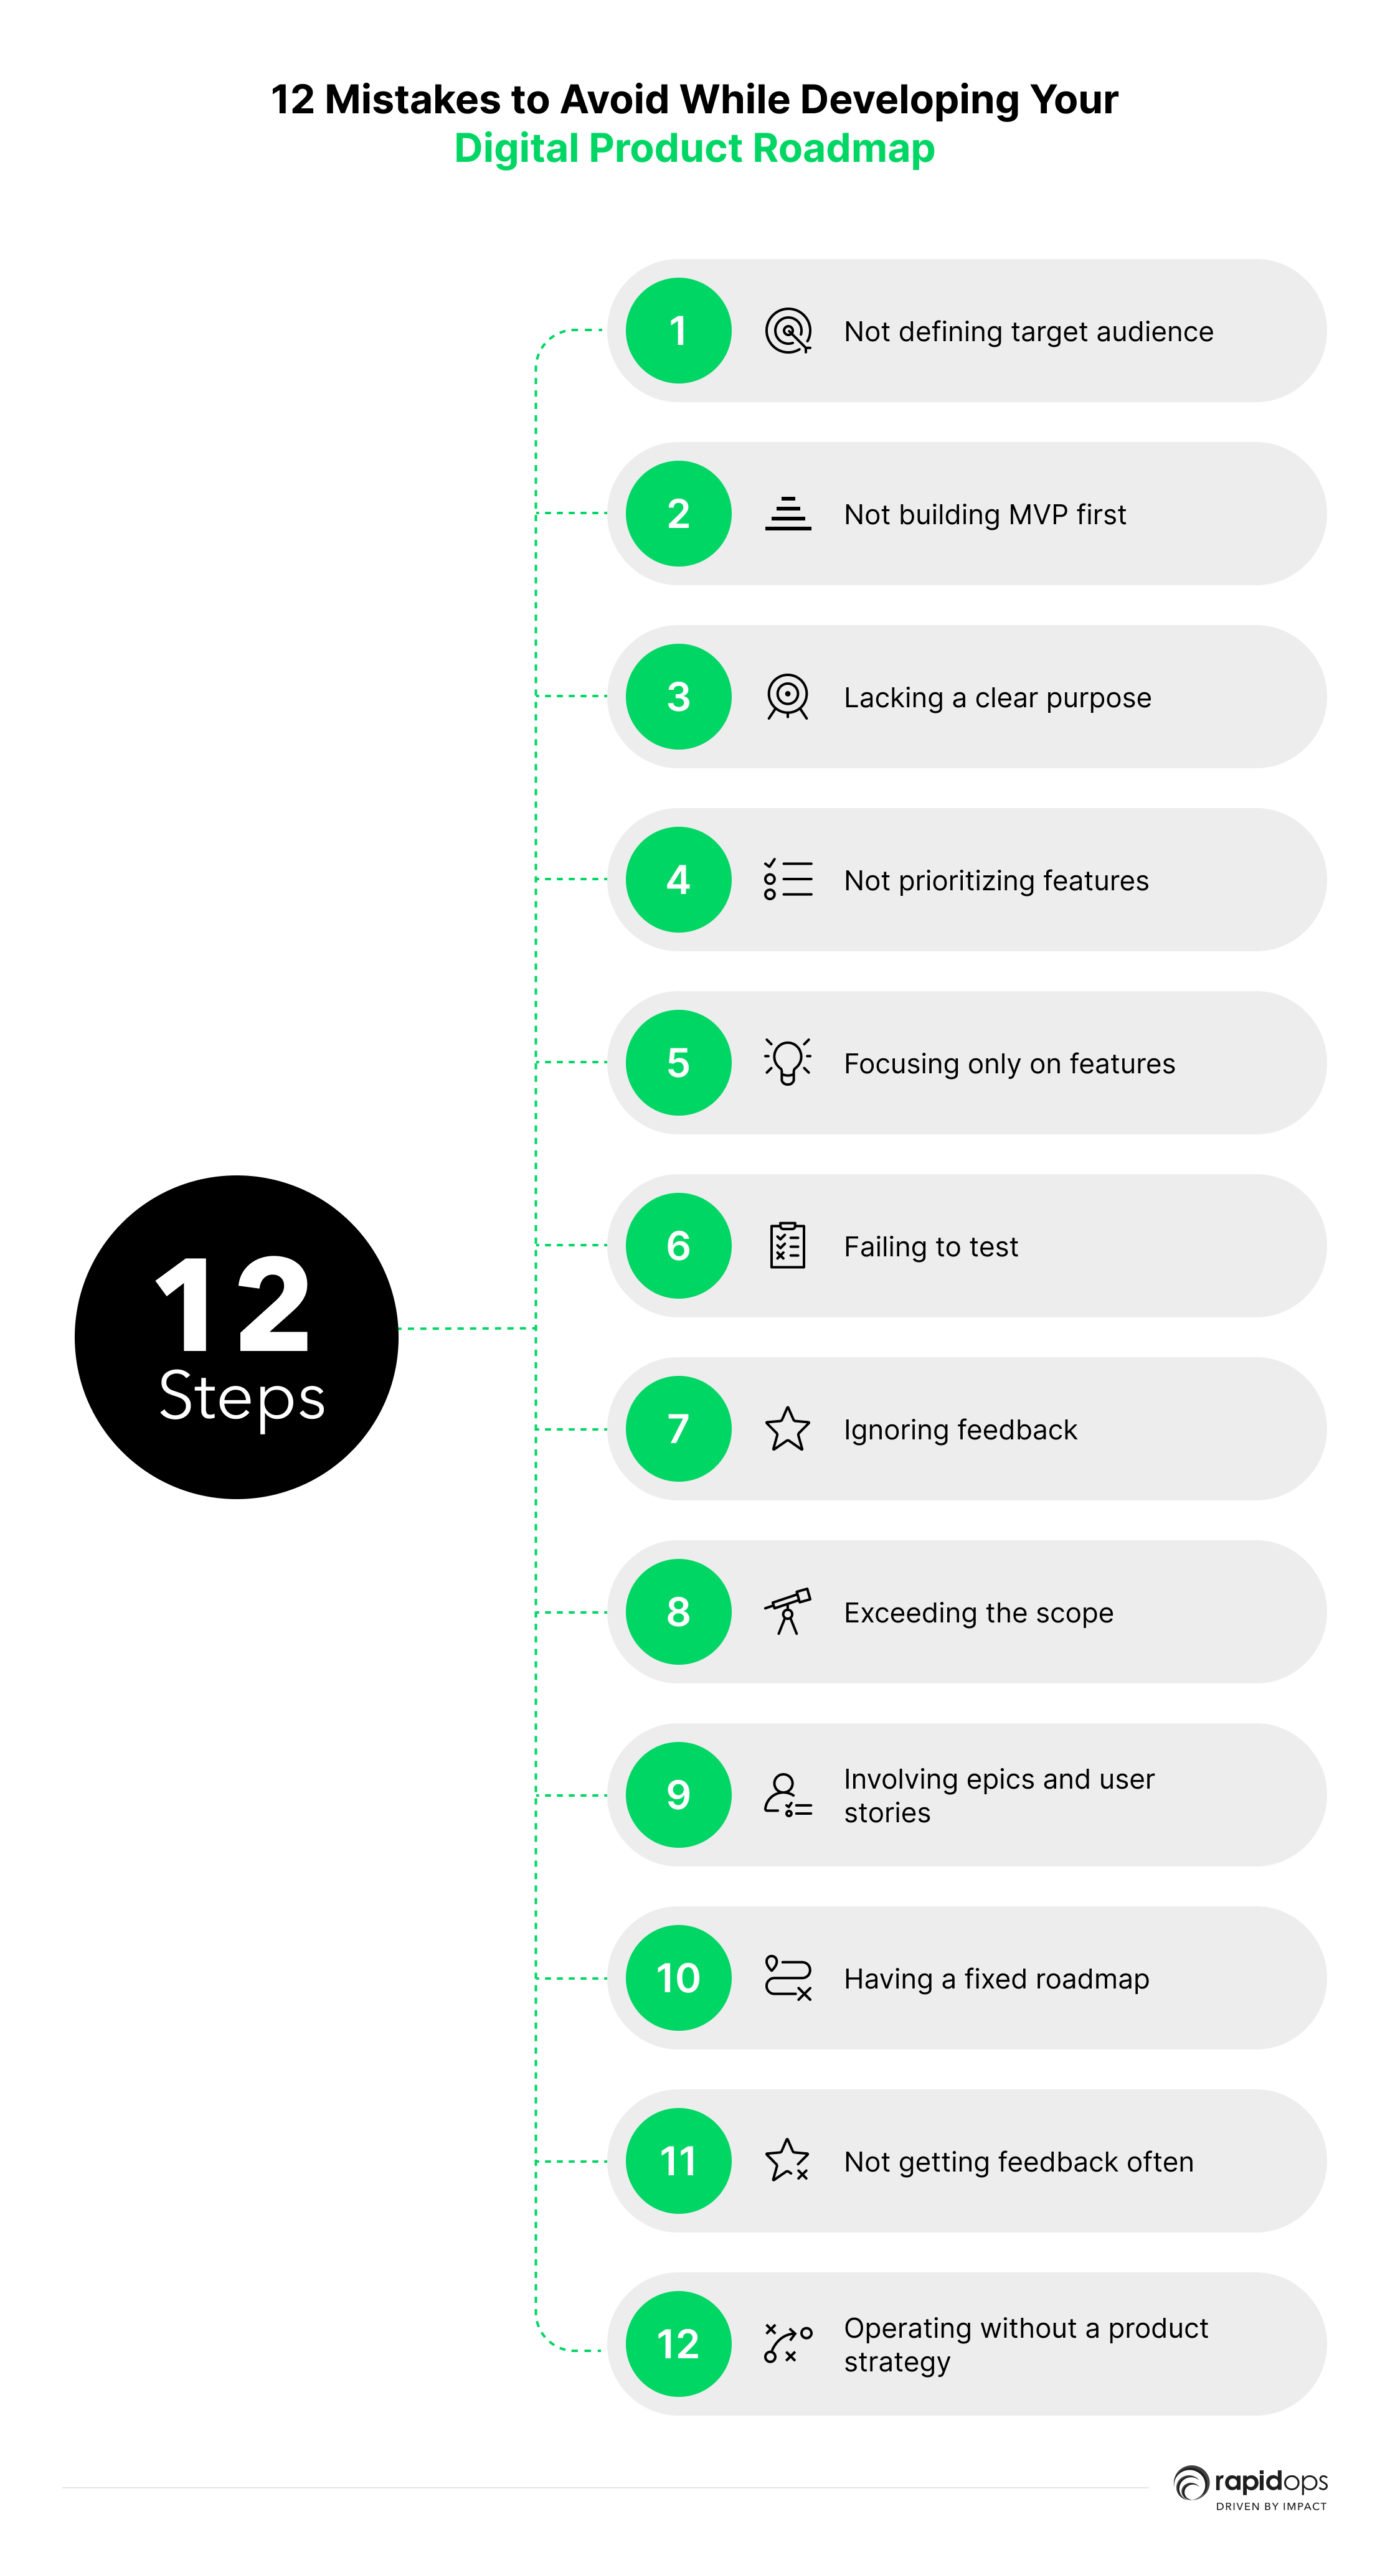 12 Mistakes to avoid while developing your digital product roadmap